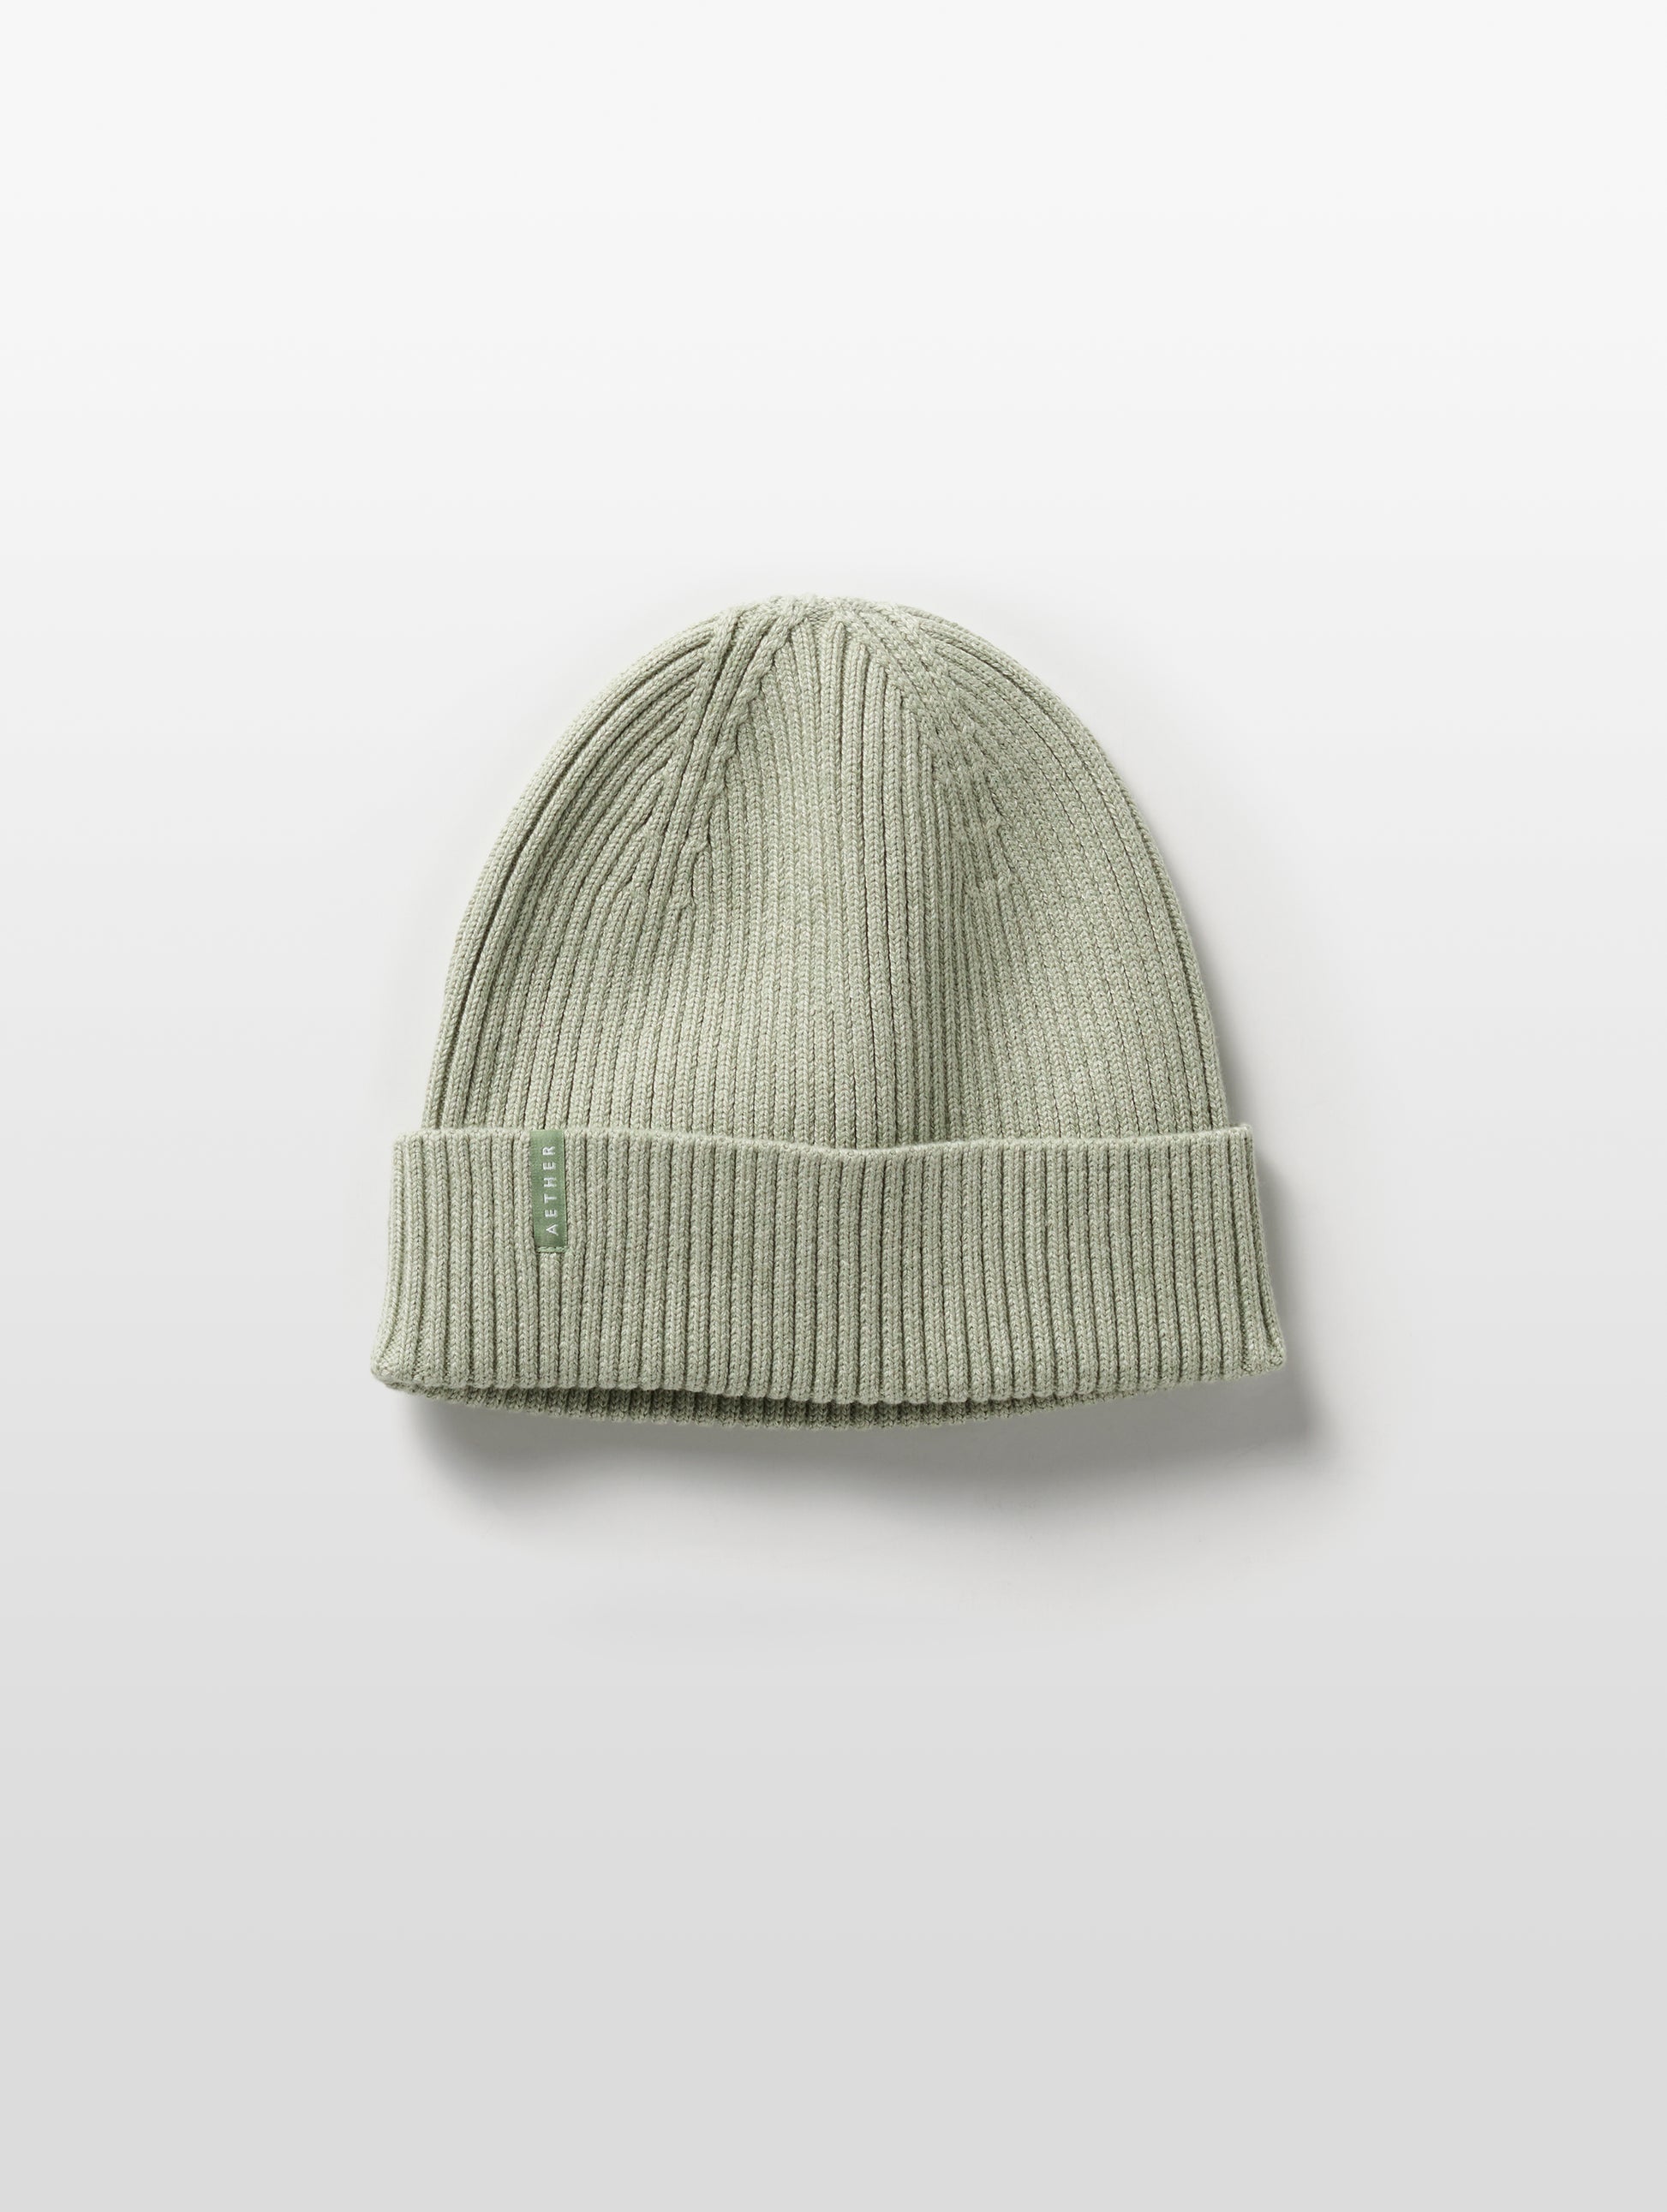 light green cotton beanie from AETHER Apparel